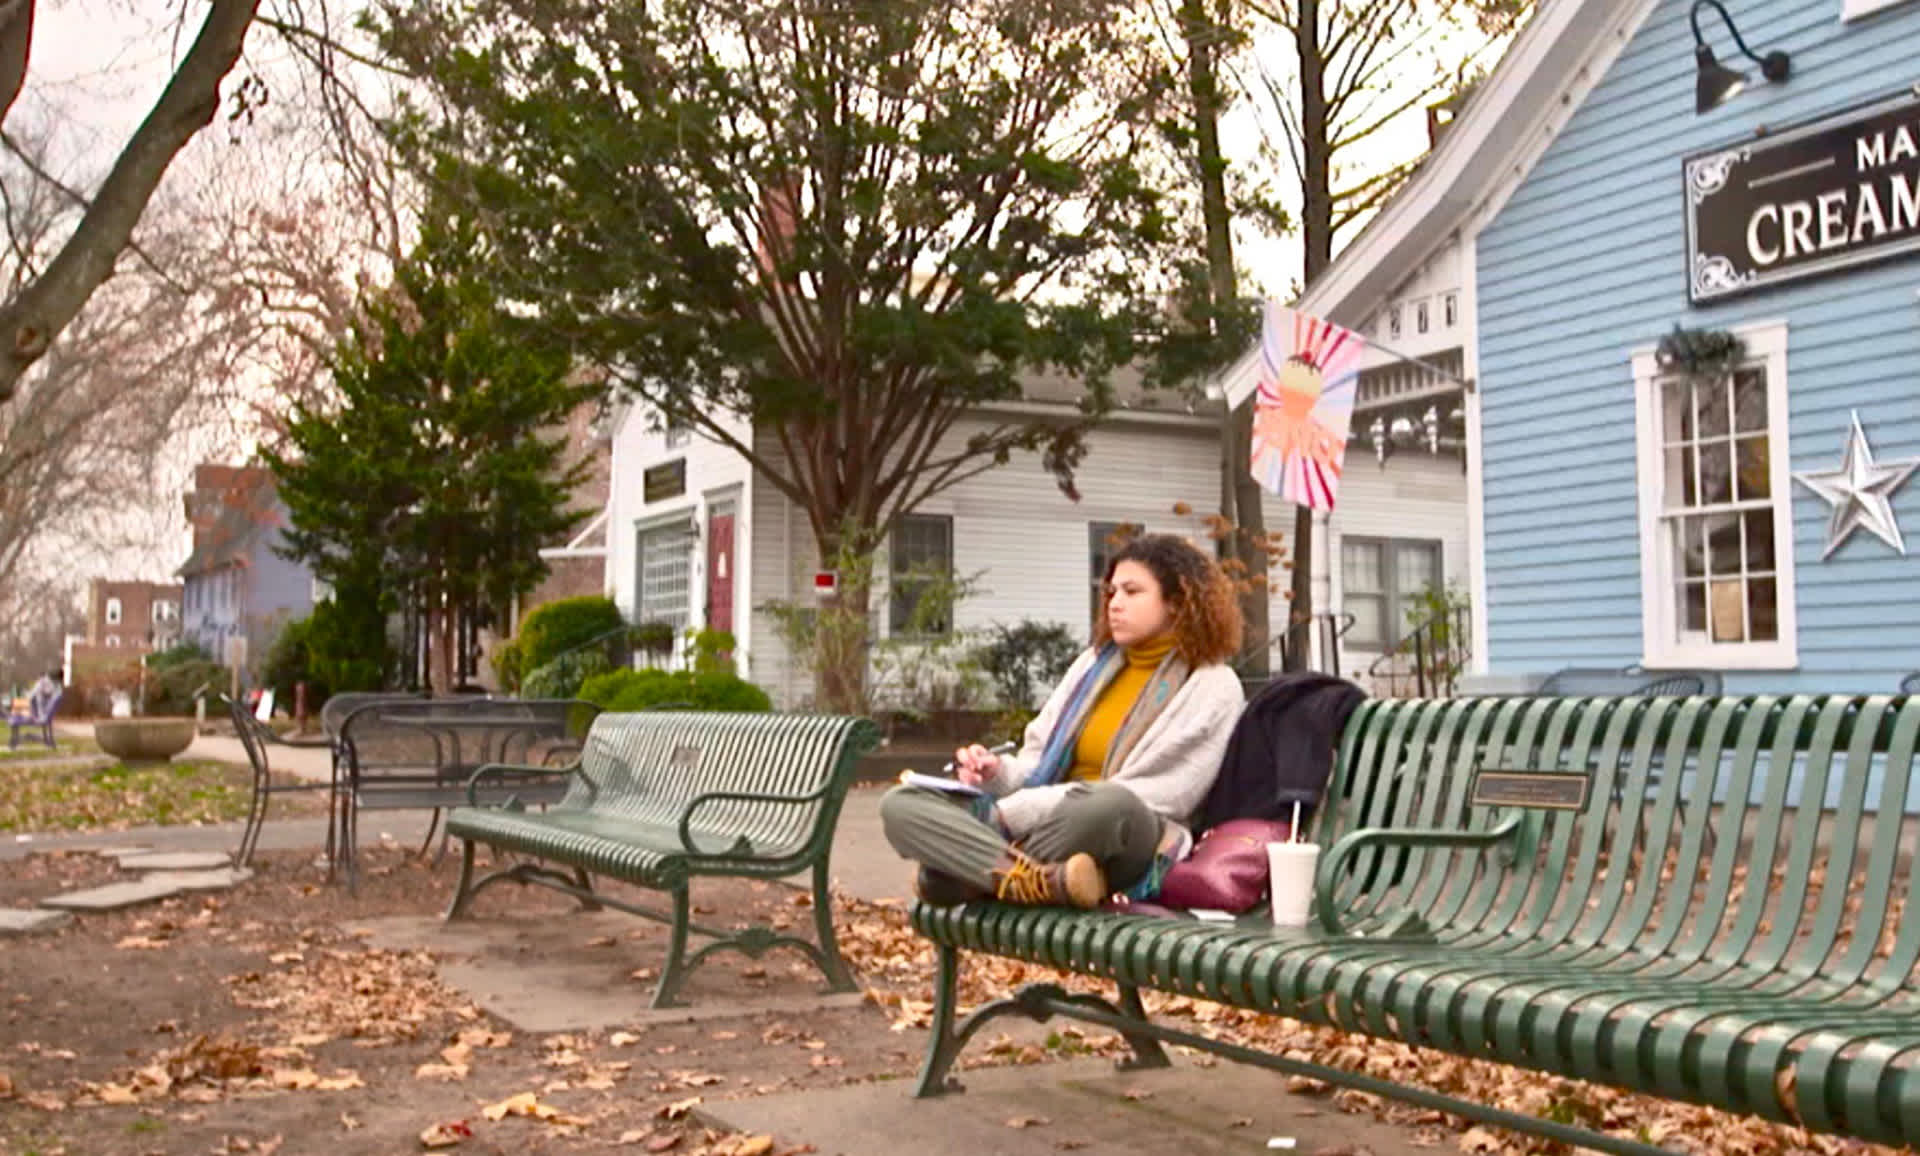 Samantha sits on a bench with her journal